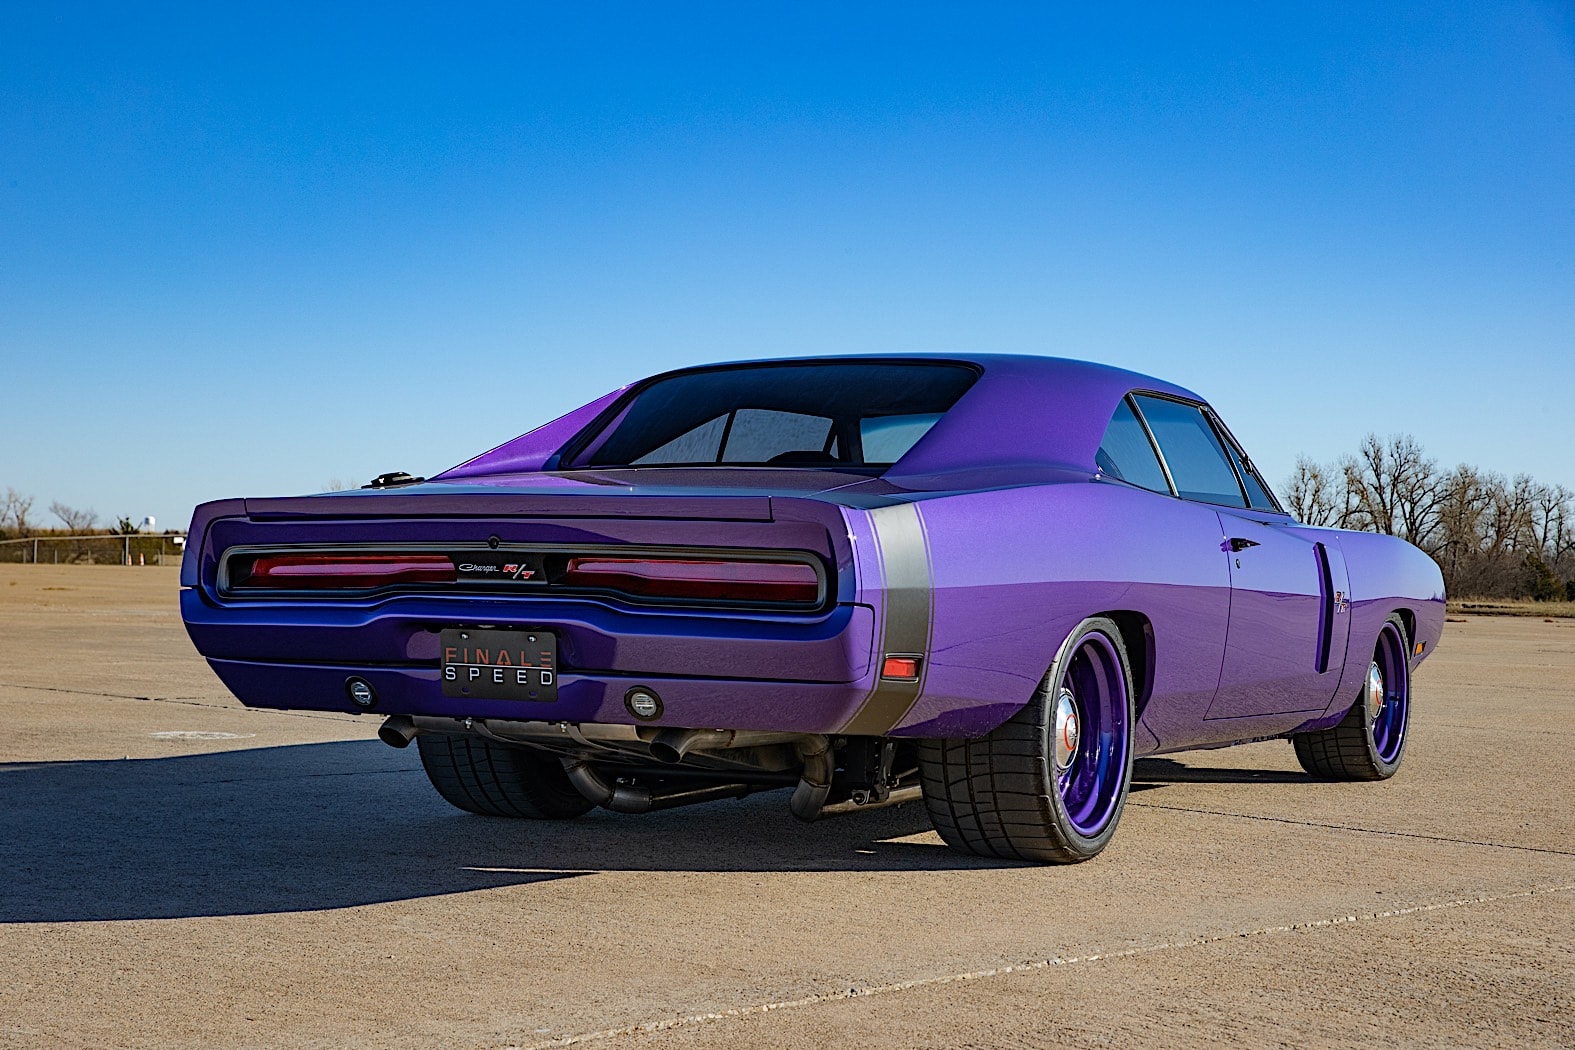 New Custom 1970 Dodge Charger Incoming With 707 HP Hellcat Engine and  Carbon Fiber Body - autoevolution